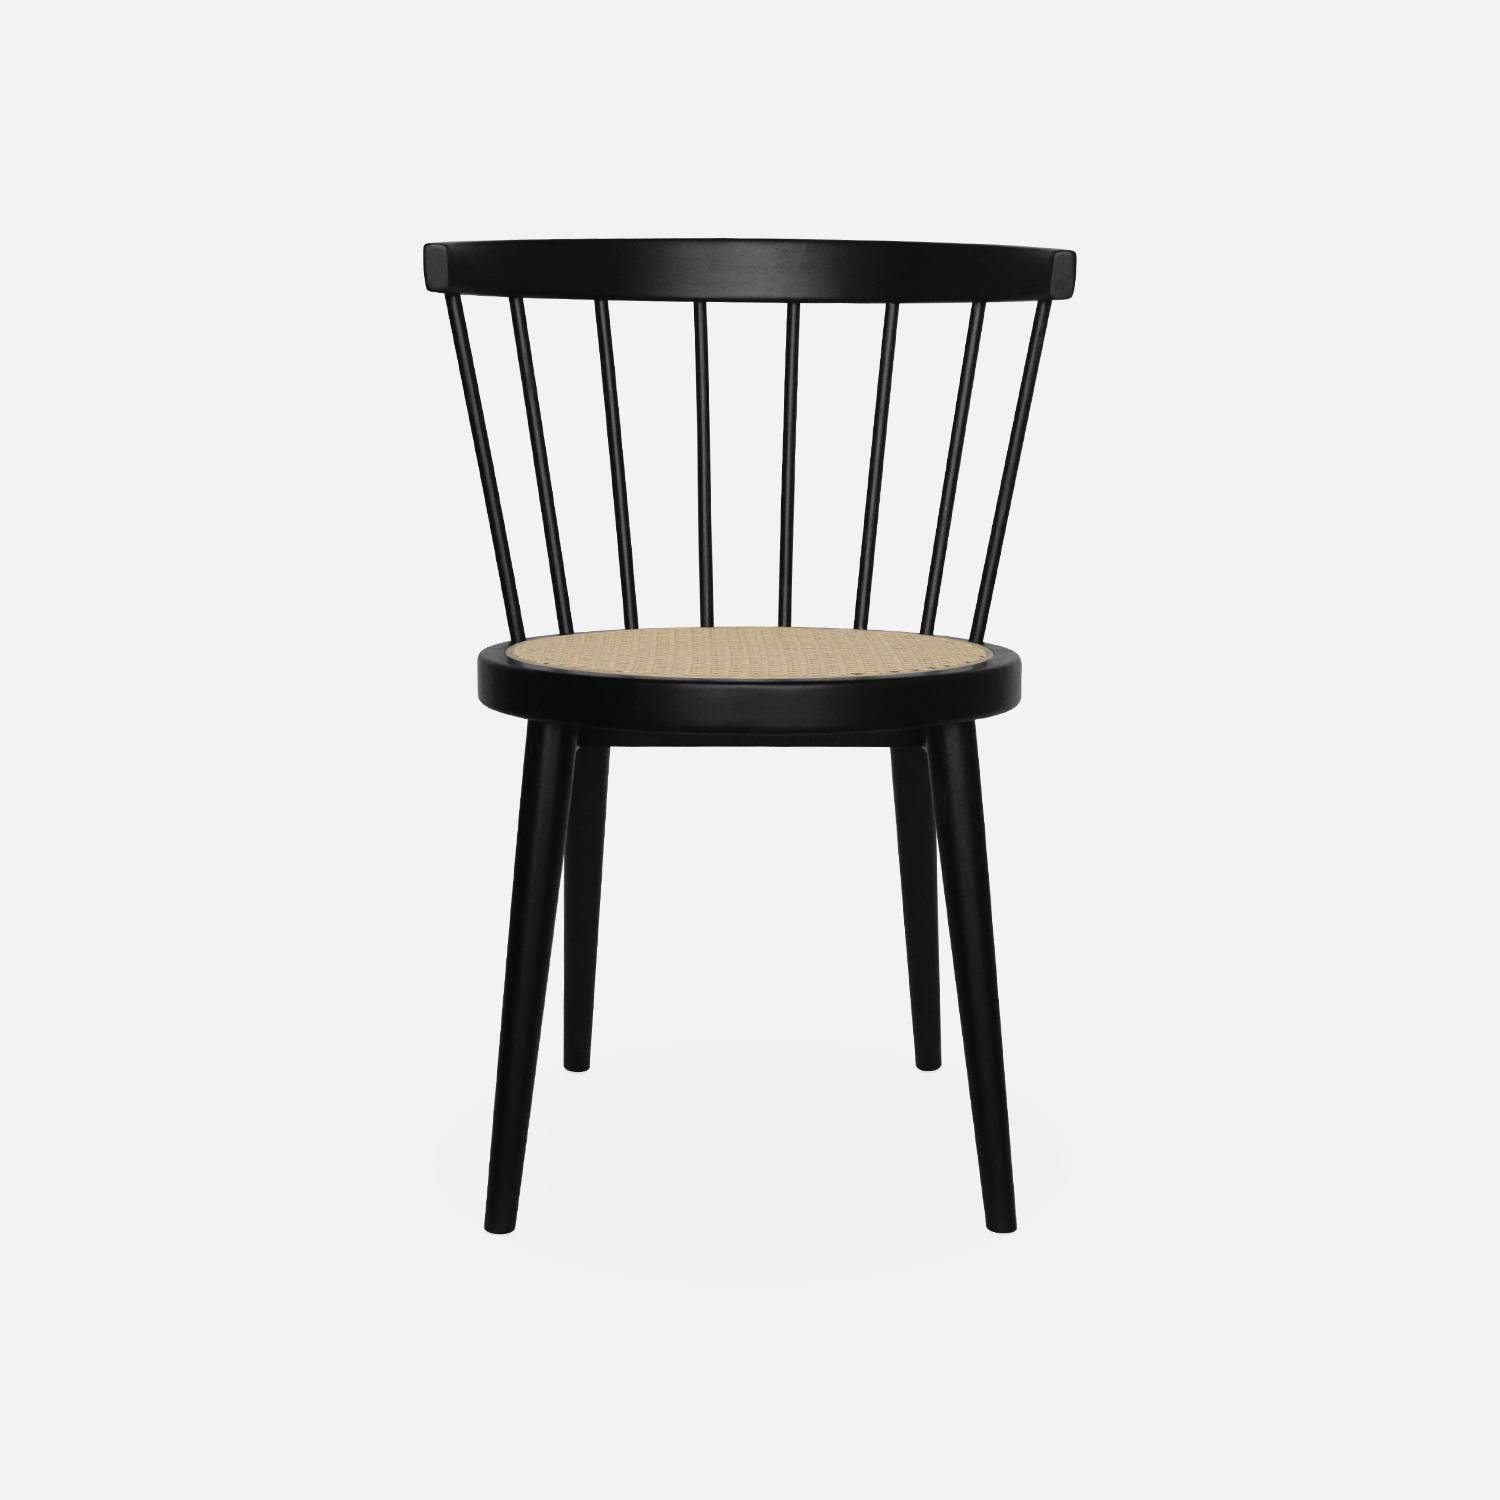 Pair of wood and cane dining chairs, W53 x D53.5 x H76cm, black Photo6